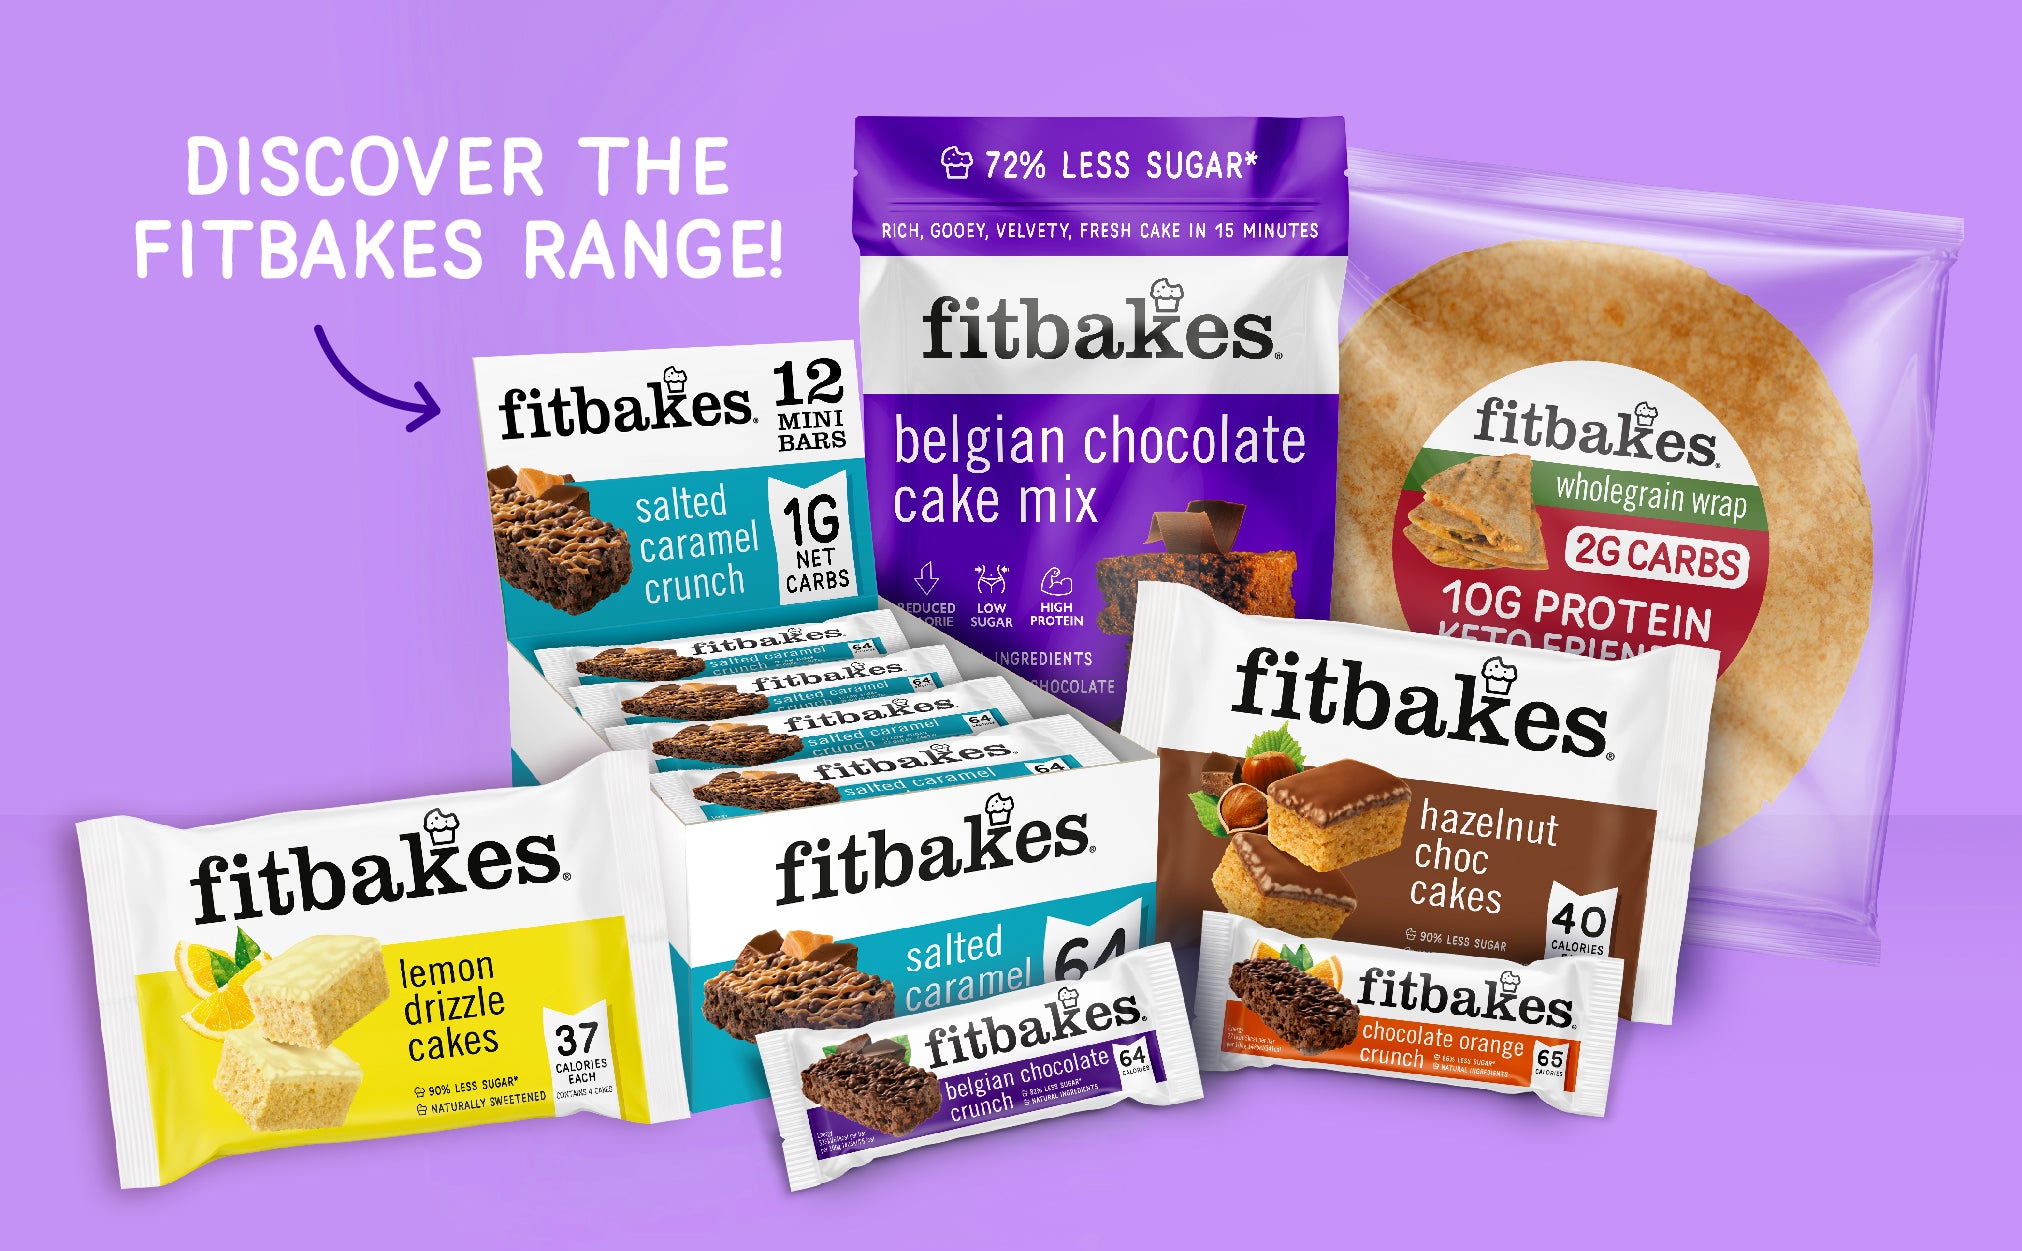 Fitbakes Discount, Sales, Sale, Bakery Chocolate, One Fiber Bar, One Fiber Bars